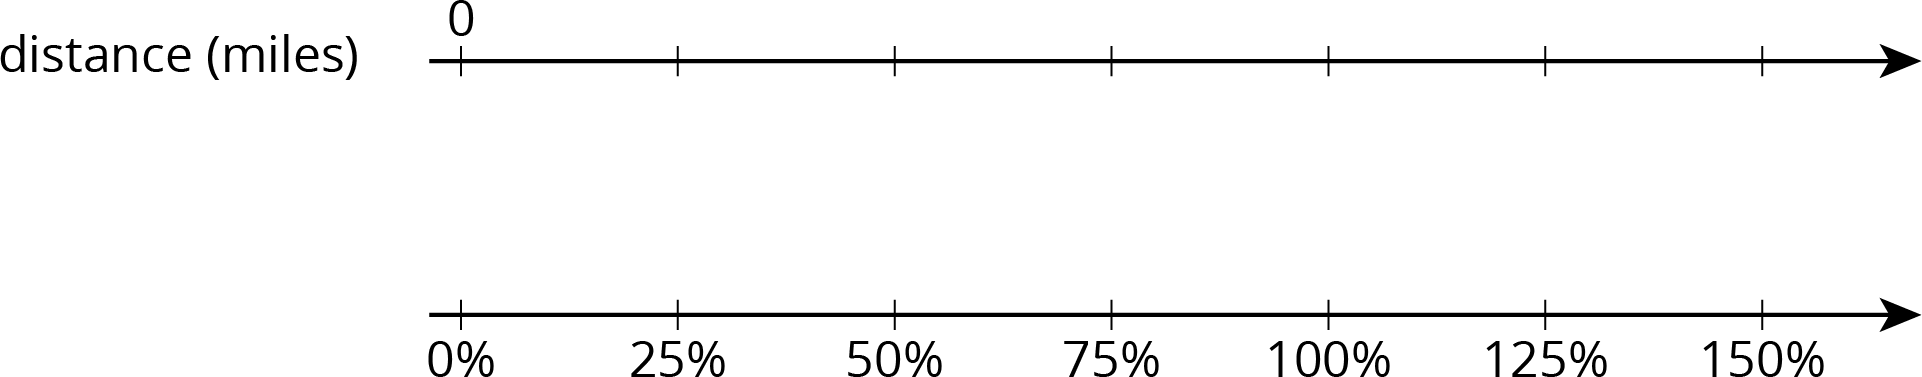 A double number line for “distance in miles” with 7 evenly spaced tick marks. The top number line has the number 0 on the first tick mark and the remaining tick marks are blank. The bottom number line starting with the first tick mark, 0 percent, 25 percent, 50 percent, 75 percent, 100 percent, 125 percent and 150 percent are labeled